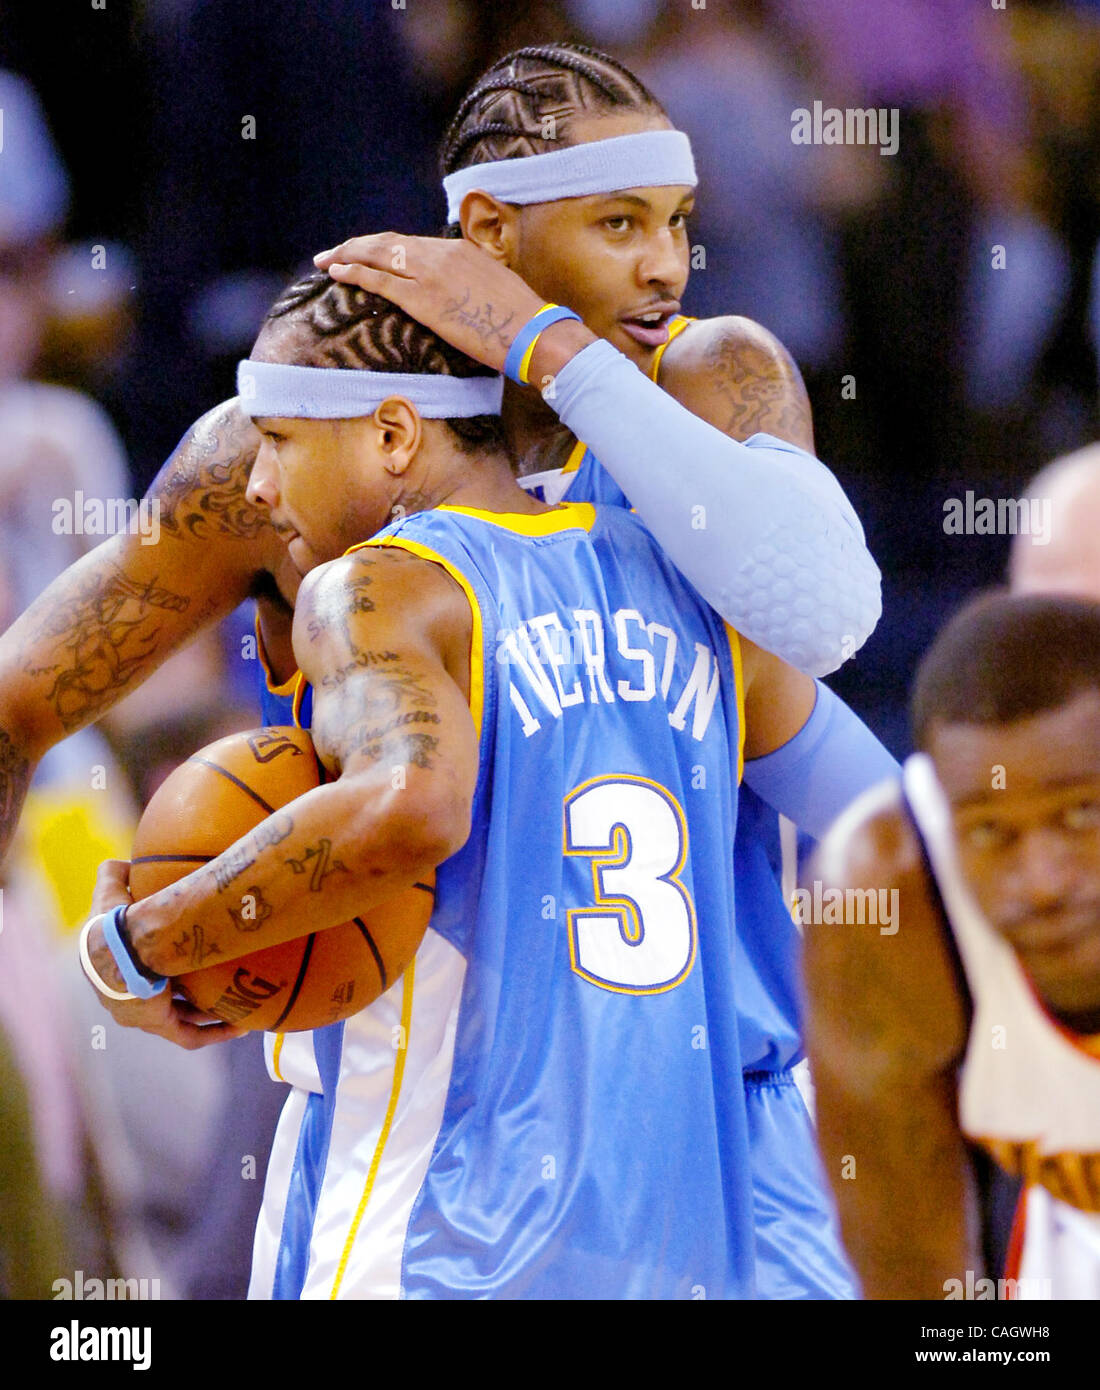 Allen iverson hi-res stock photography and images - Alamy